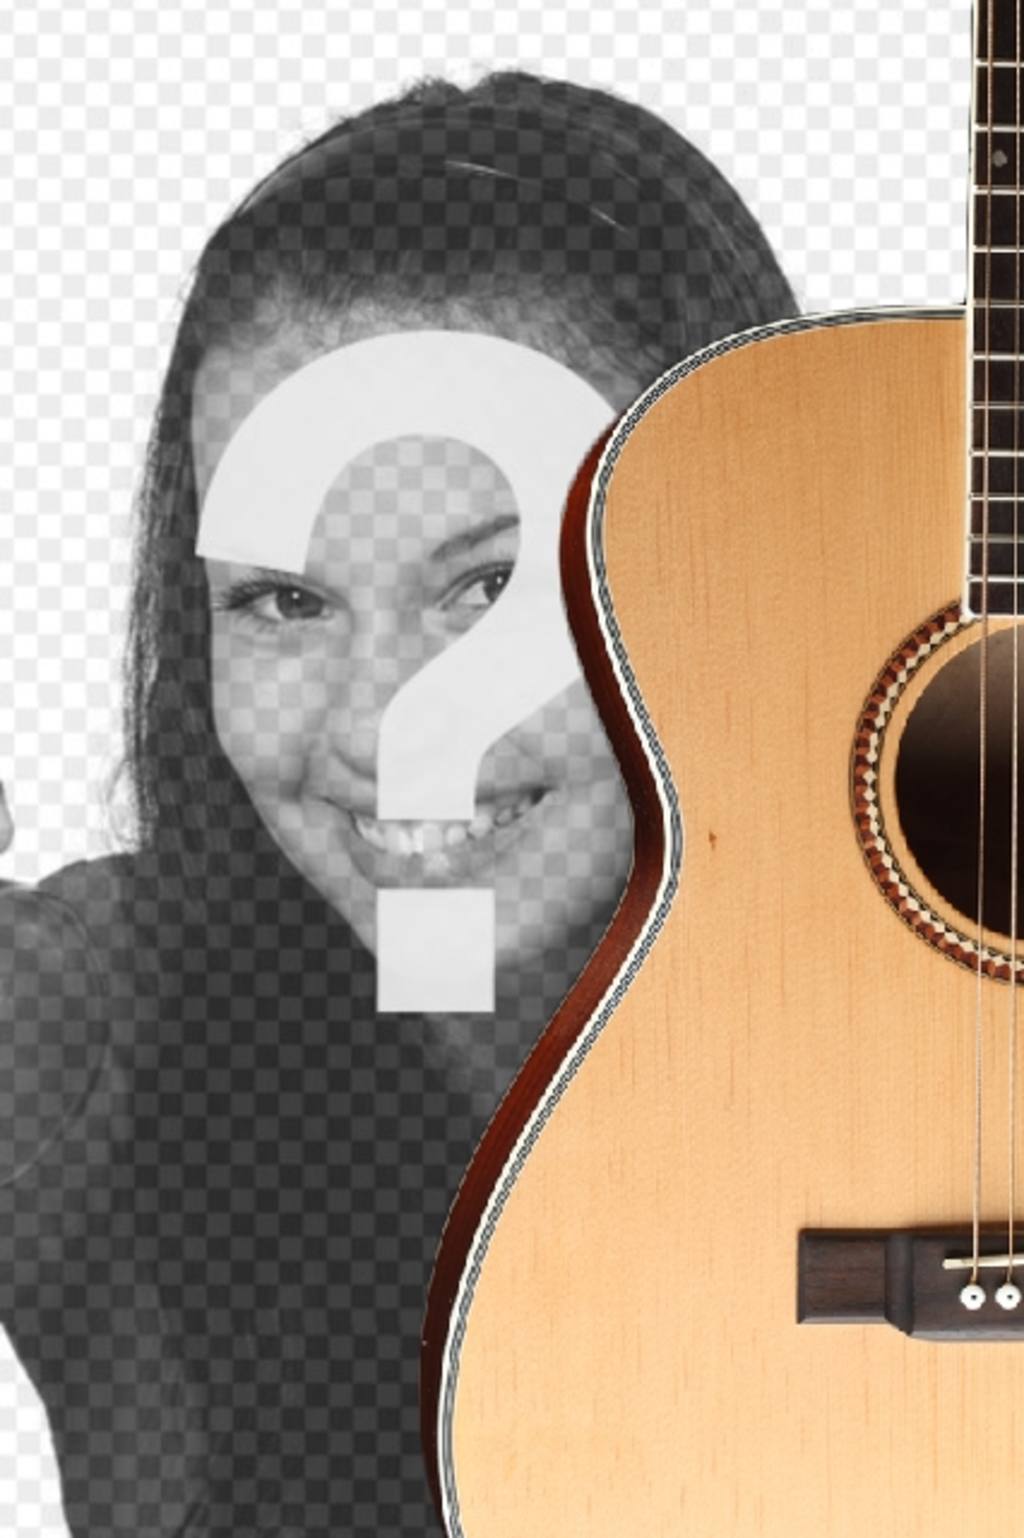 Photomontage to put a Spanish guitar in a photo and add text..